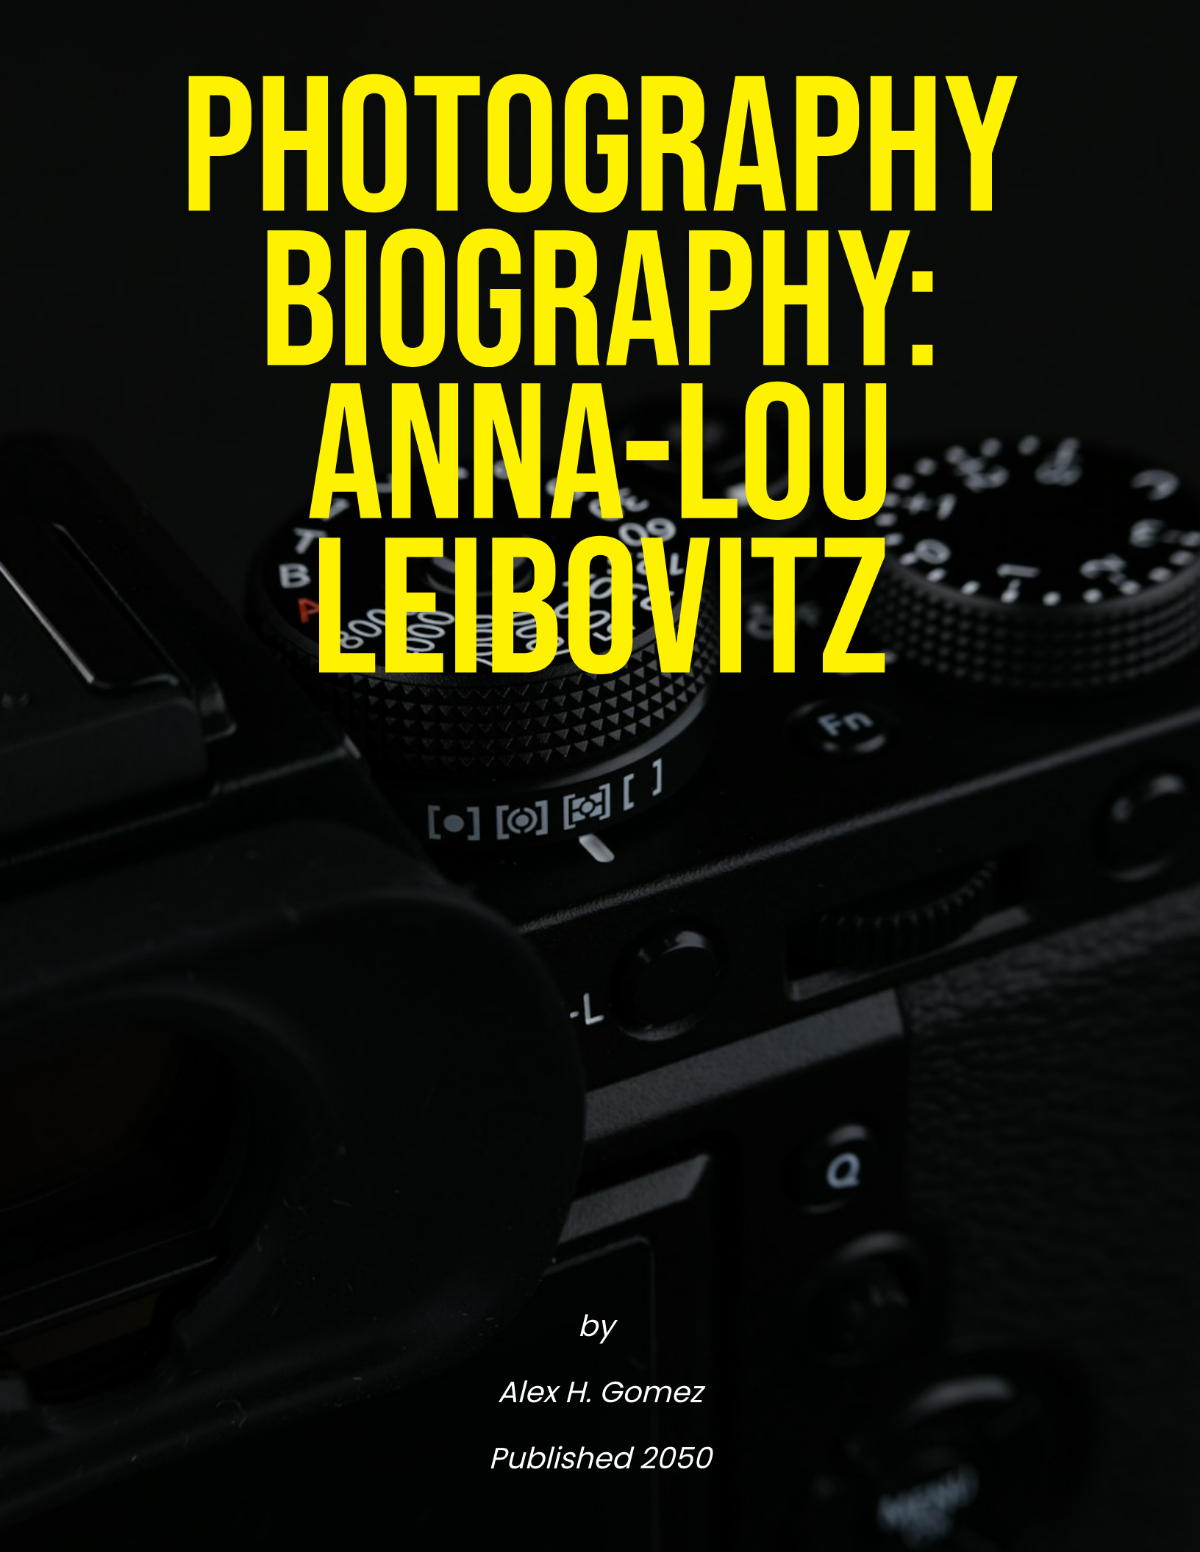 Photography Biography Template